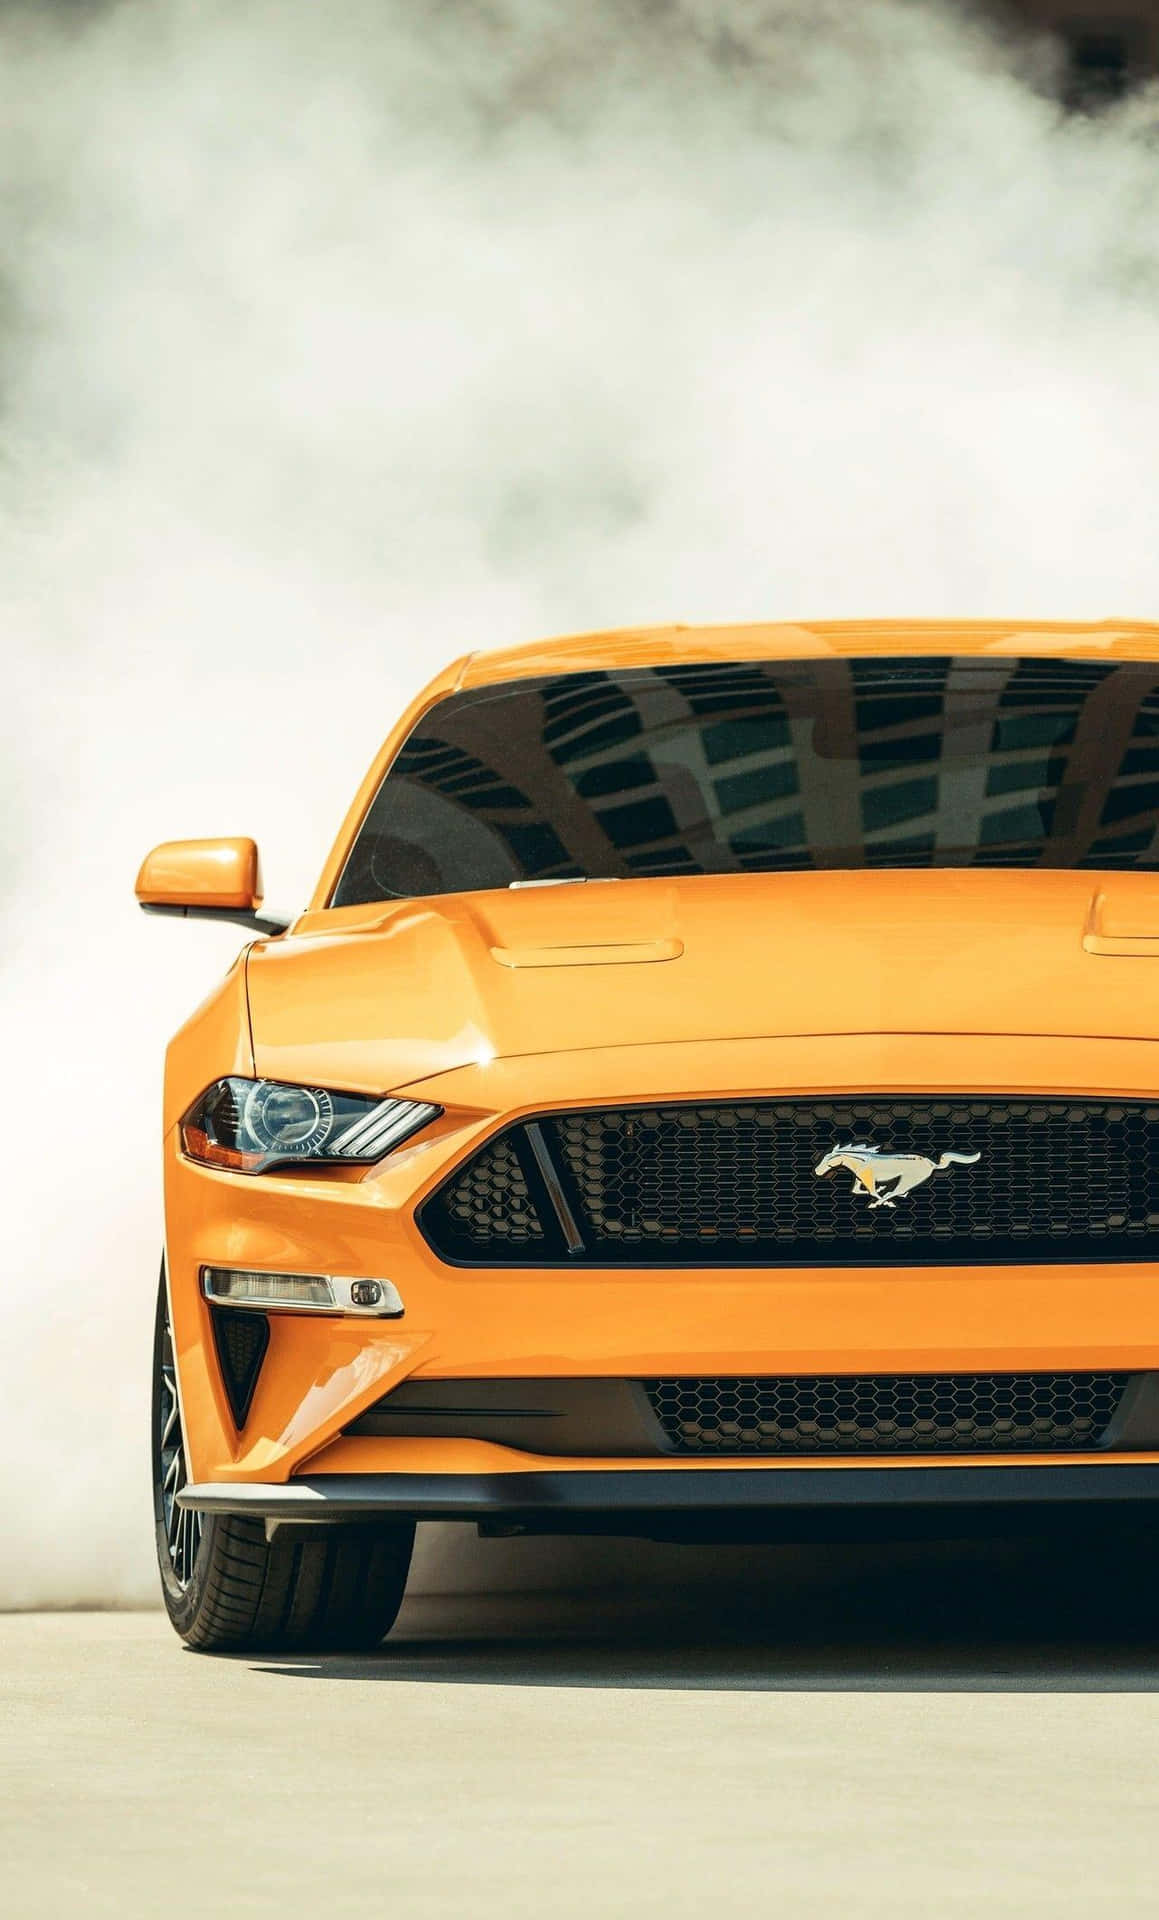 Get behind the wheel of style with the Mustang iPhone Wallpaper